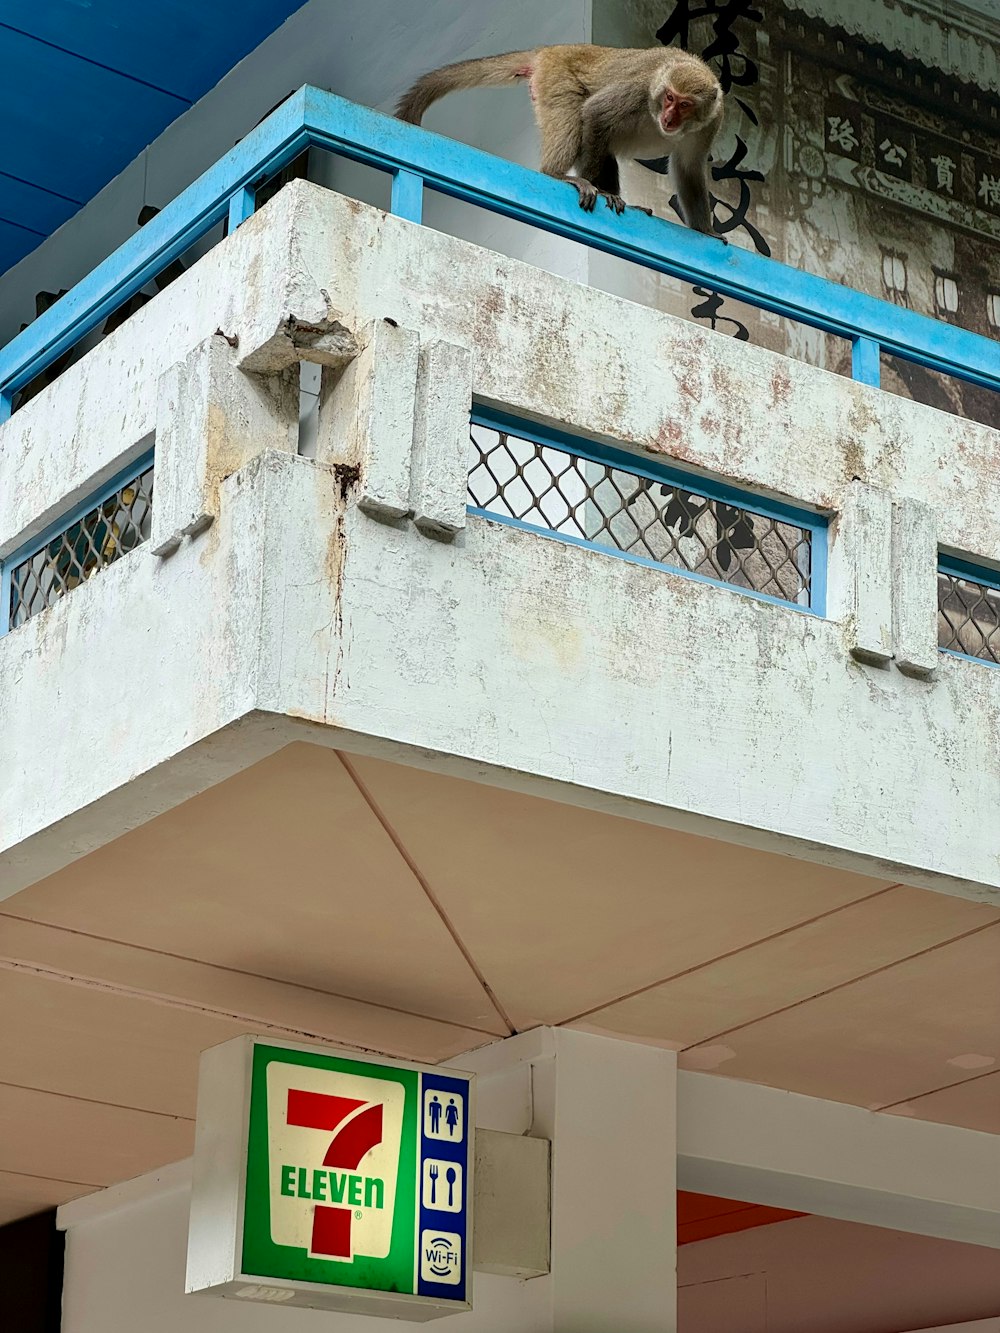 a monkey sitting on top of a building next to a 7 - eleven sign